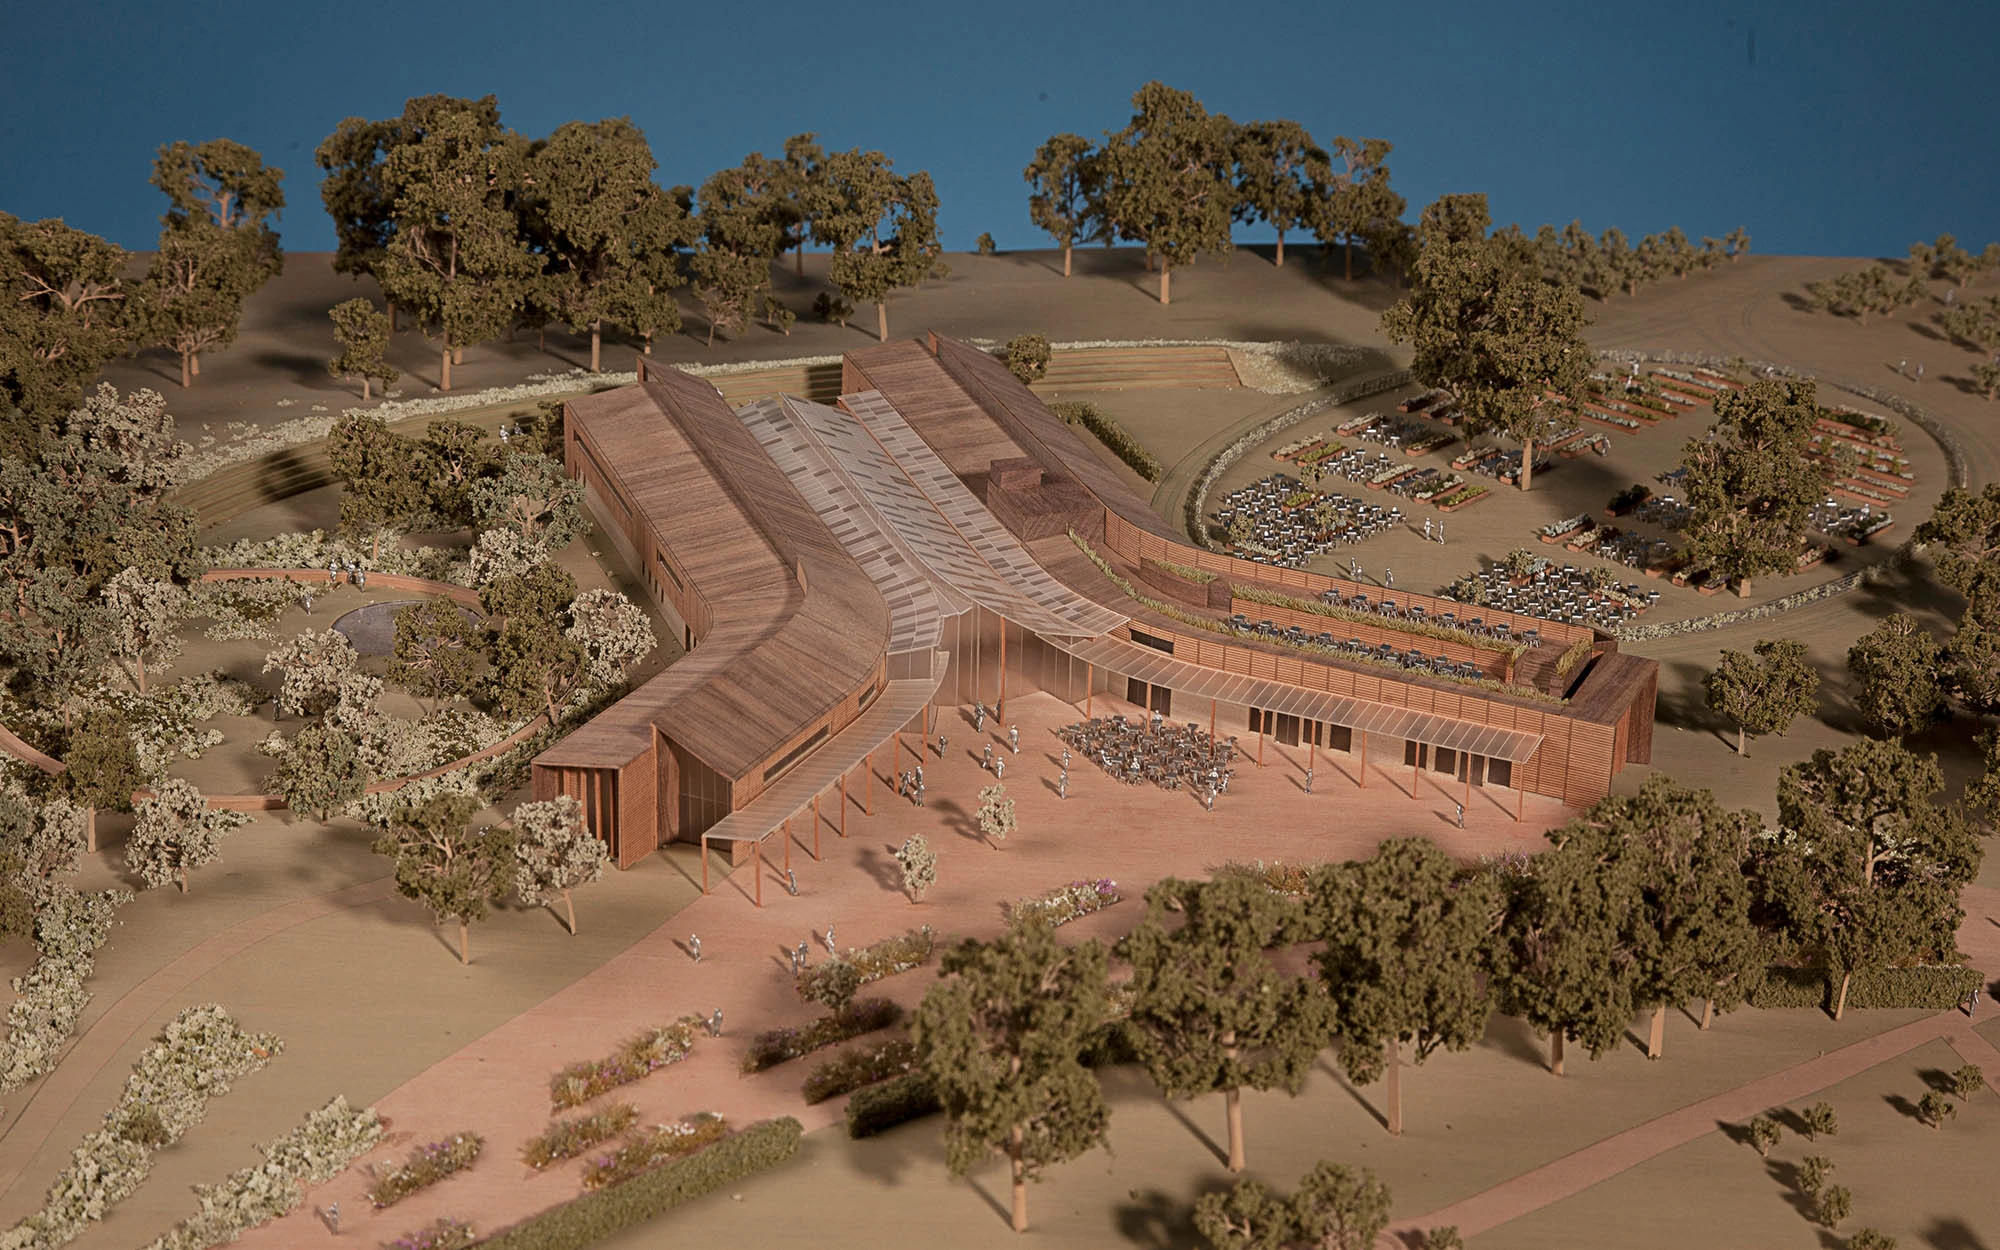 Architectural Model of the RHS Hilltop